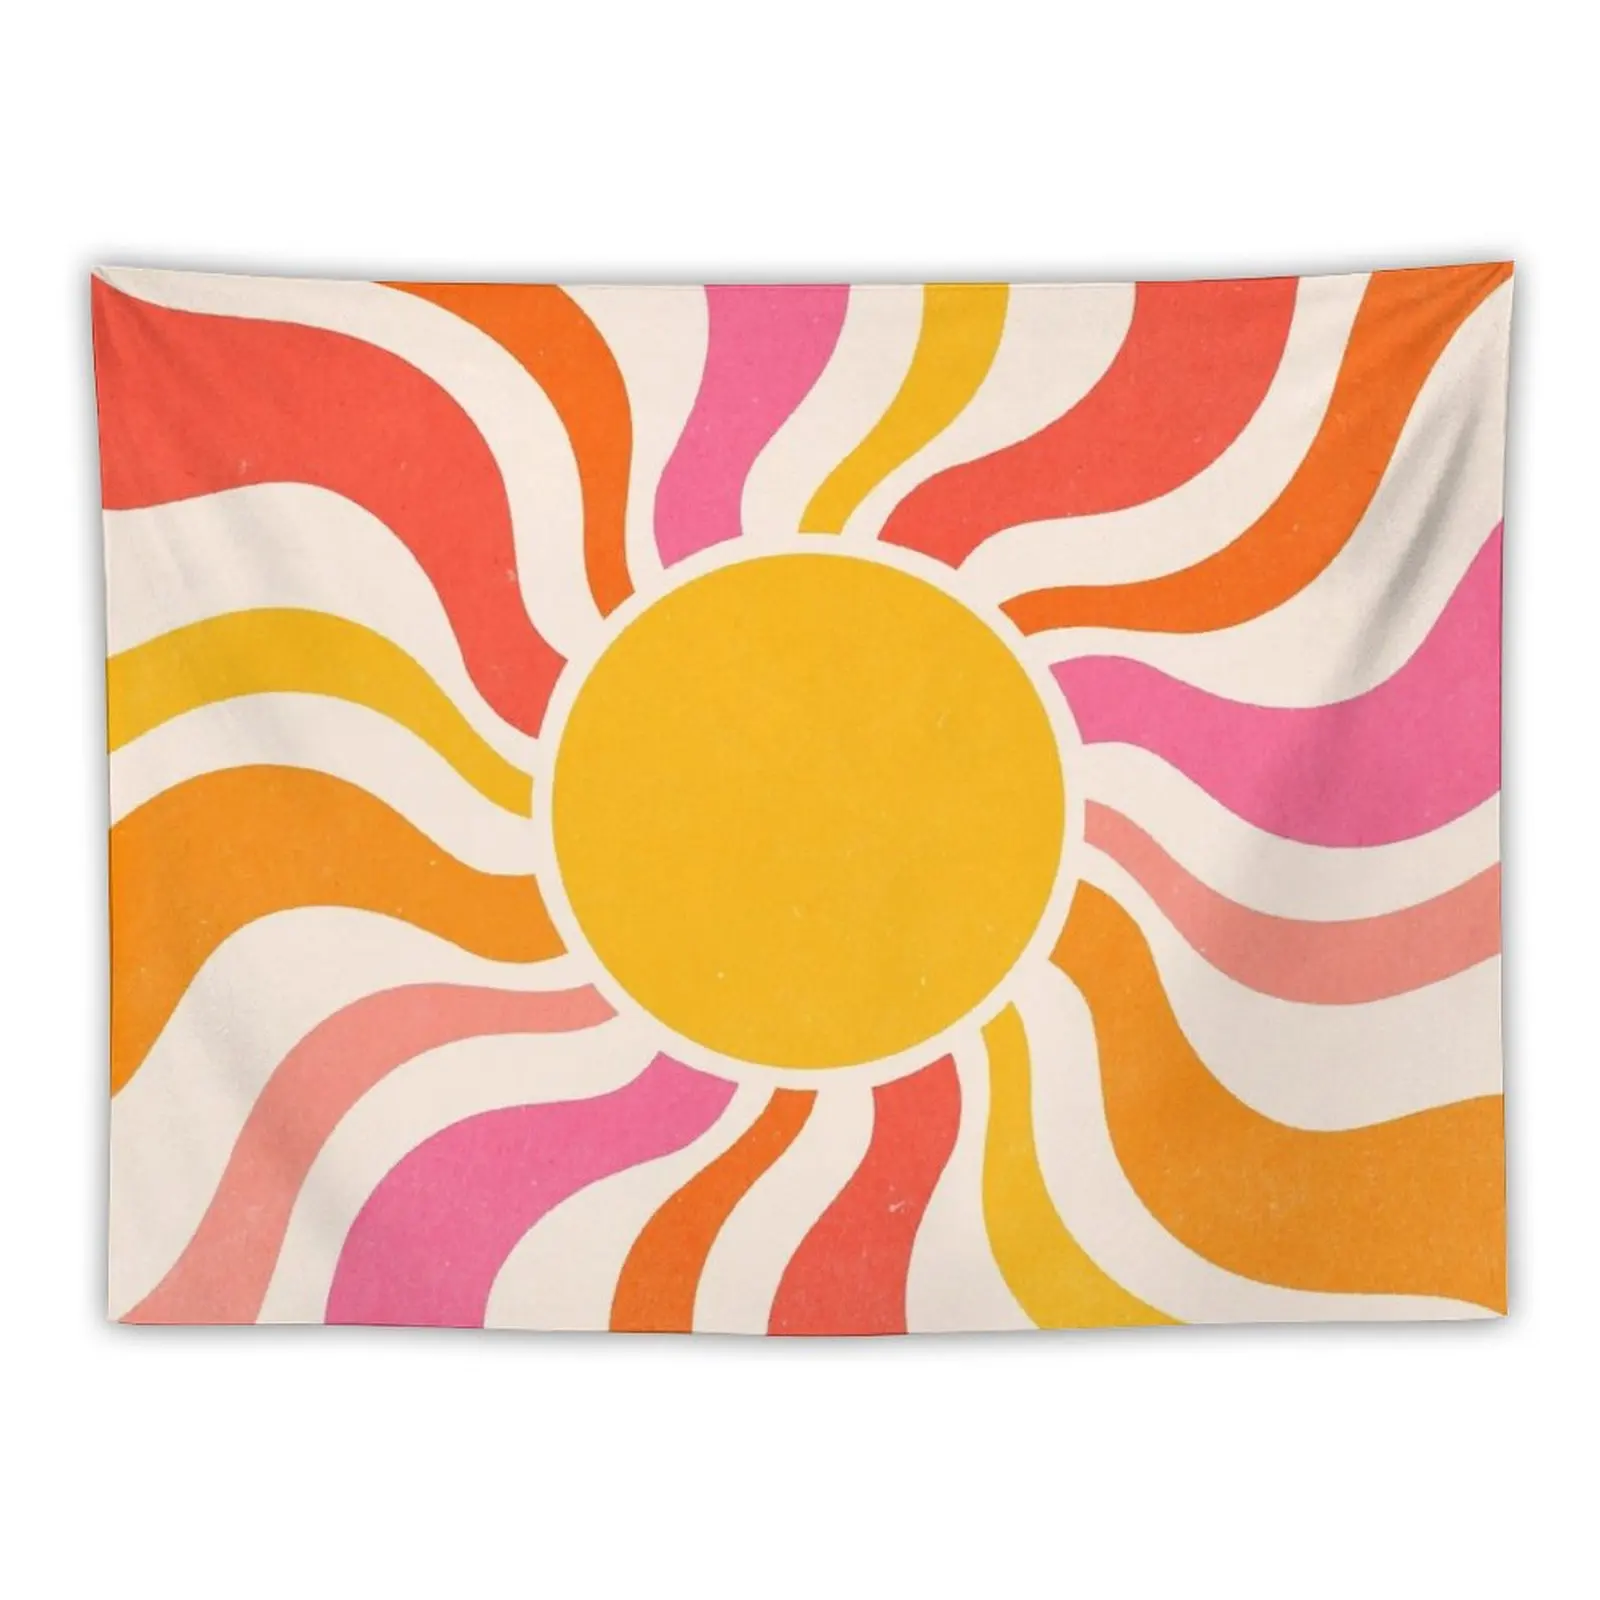 

New Sun Retro 70s Colorful Orange Pink Sunrays Tapestry Decoration For Home Room Decorating Aesthetic Wall Mural Bedroom Deco